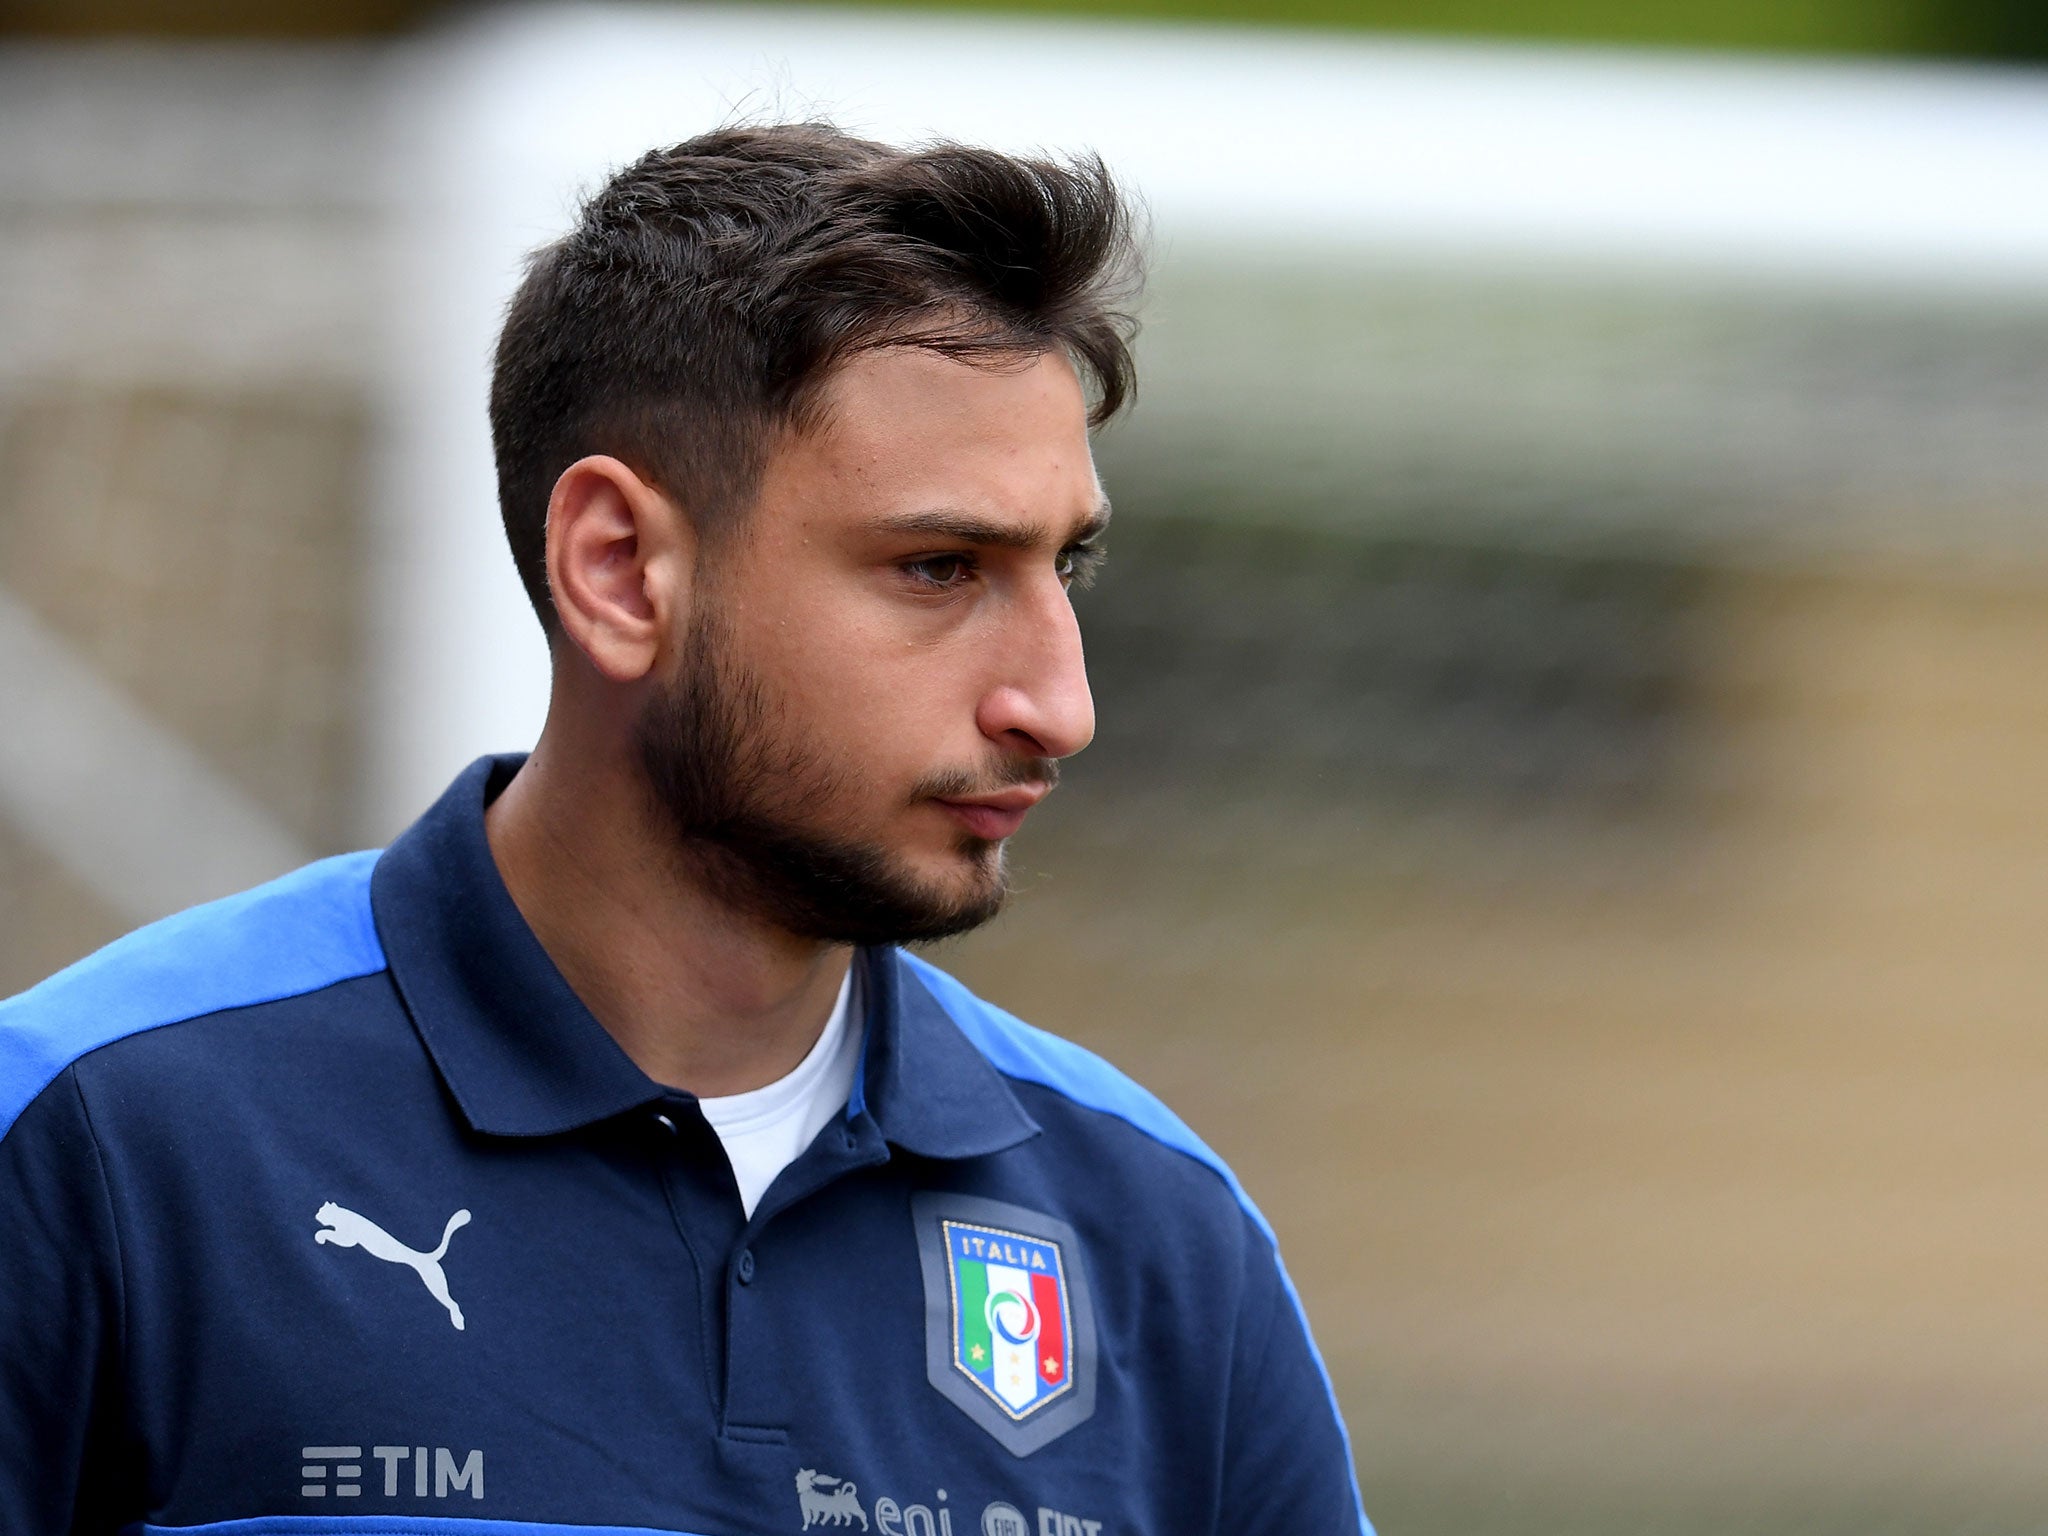 Gianluigi Donnarumma has been linked with a move away from AC Milan this summer